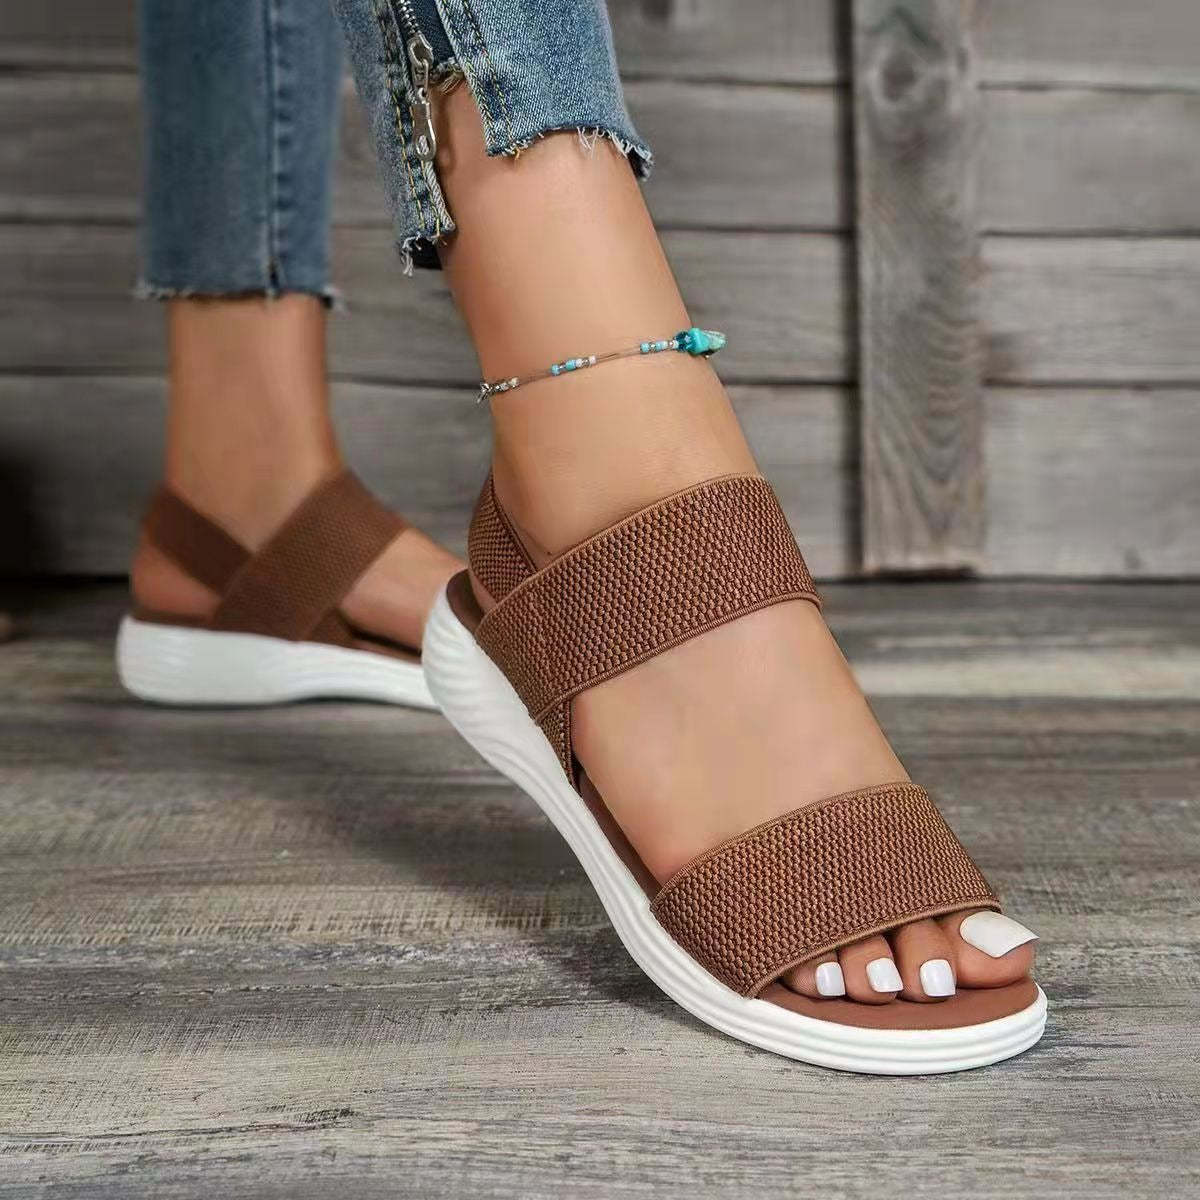 Comfortable Sandals For Women Elastic Band Casual Summer